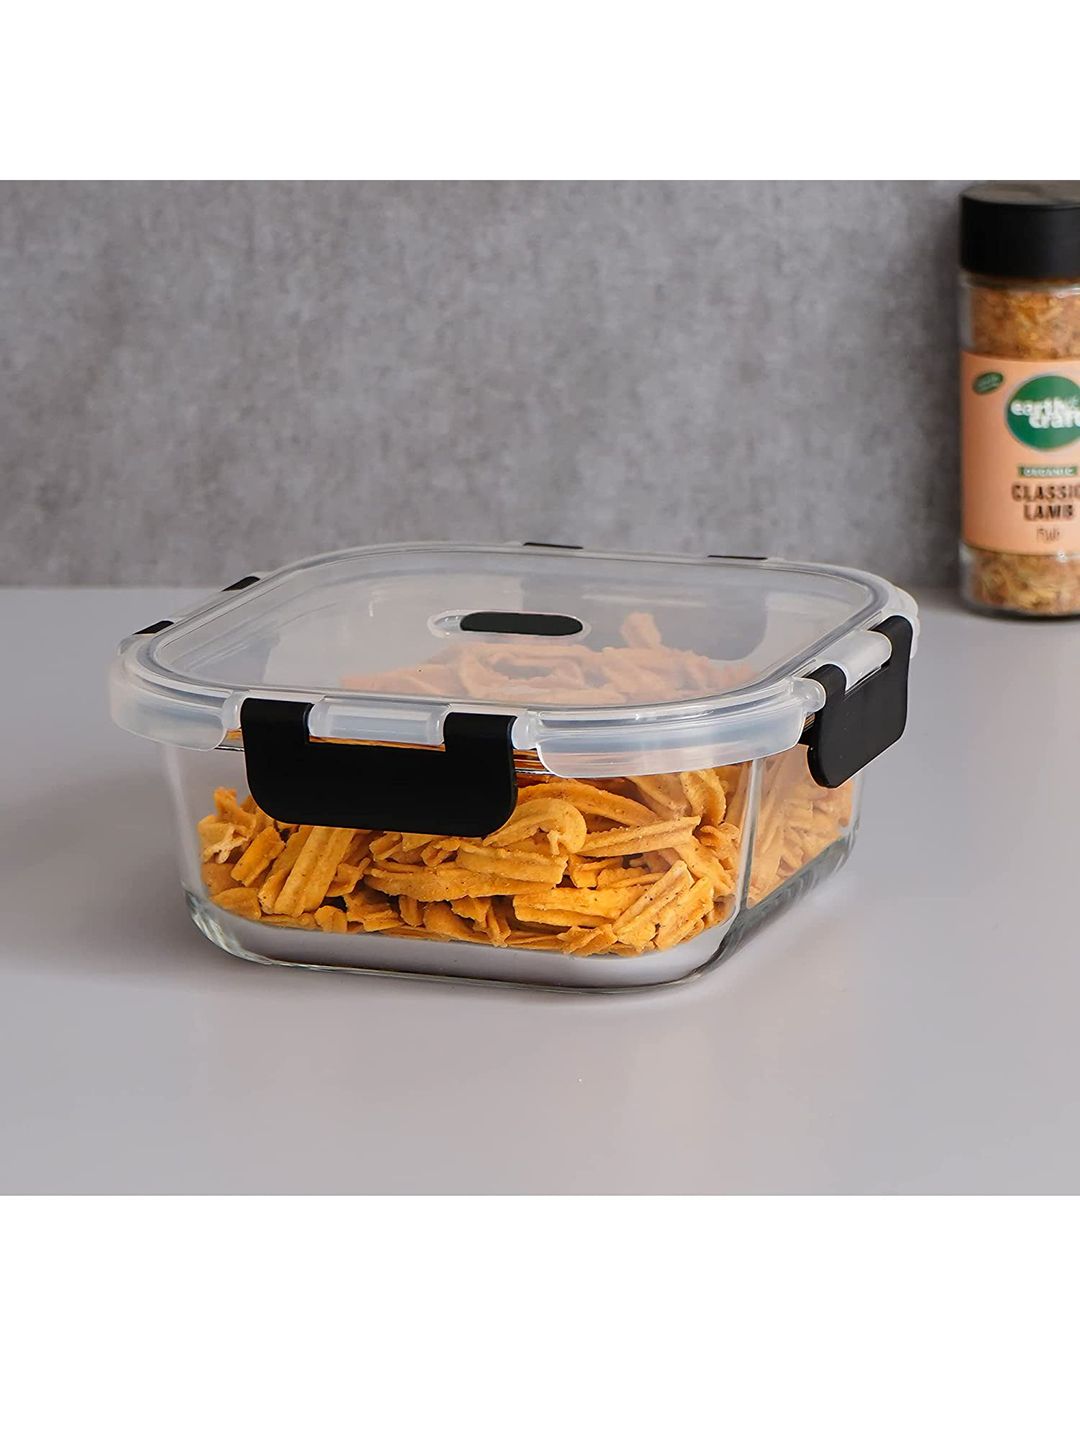 Femora Set Of 2 Borosilicate Glass Microwave Safe Food Container with Air Vent Lid 1200 ml Price in India